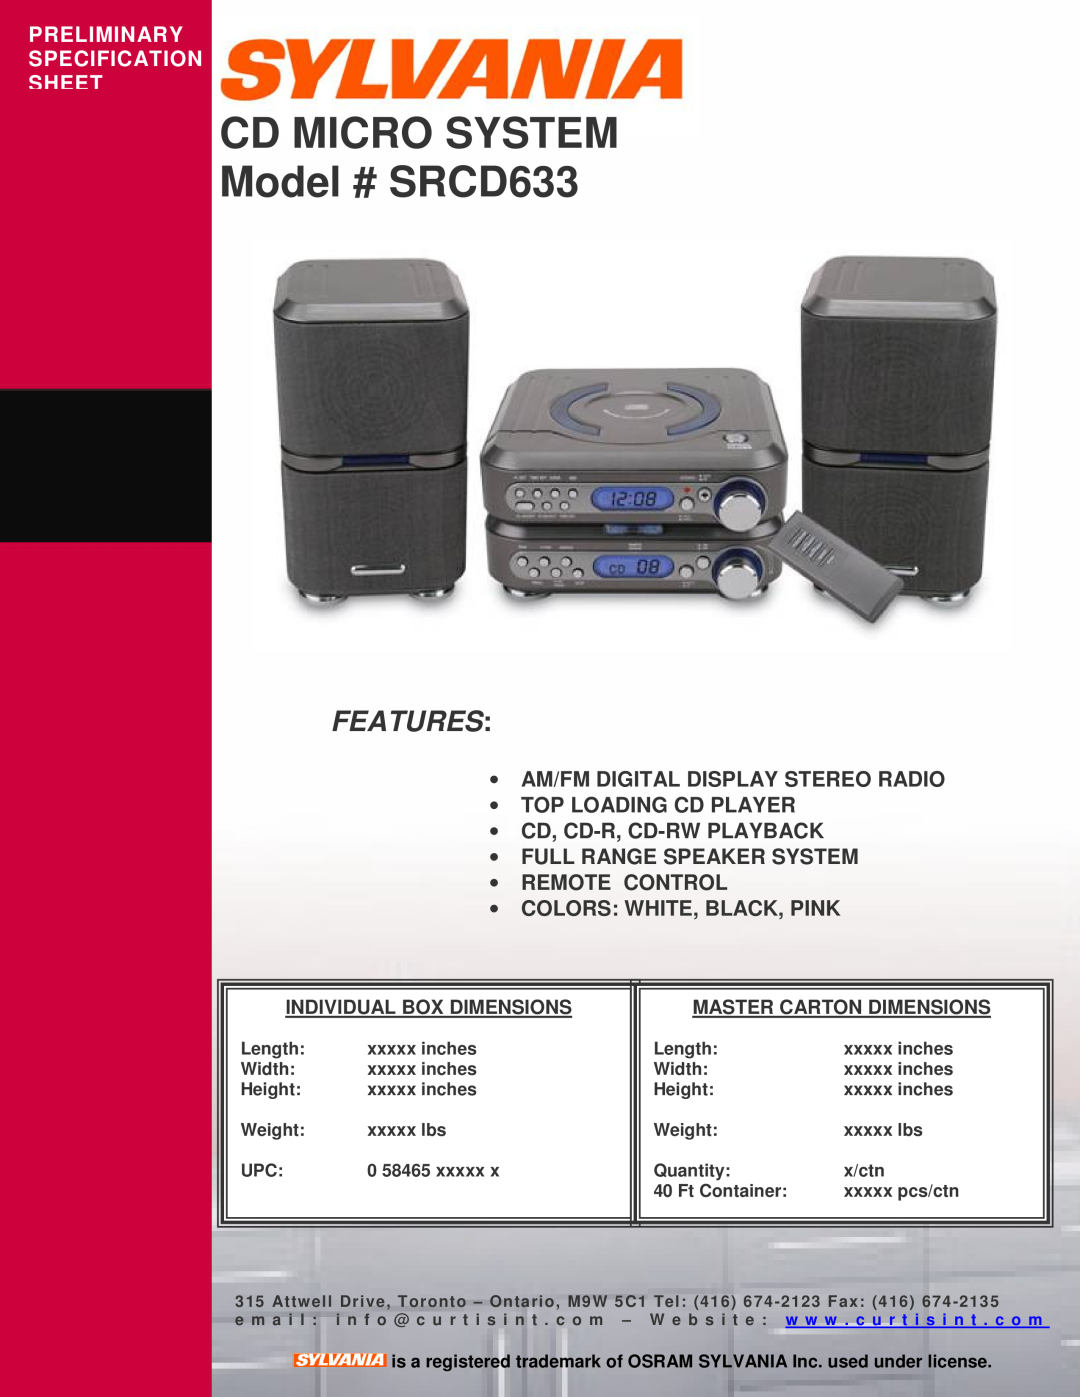 Curtis specifications CD MICRO SYSTEM Model # SRCD633, Features, Preliminary Specification Sheet 